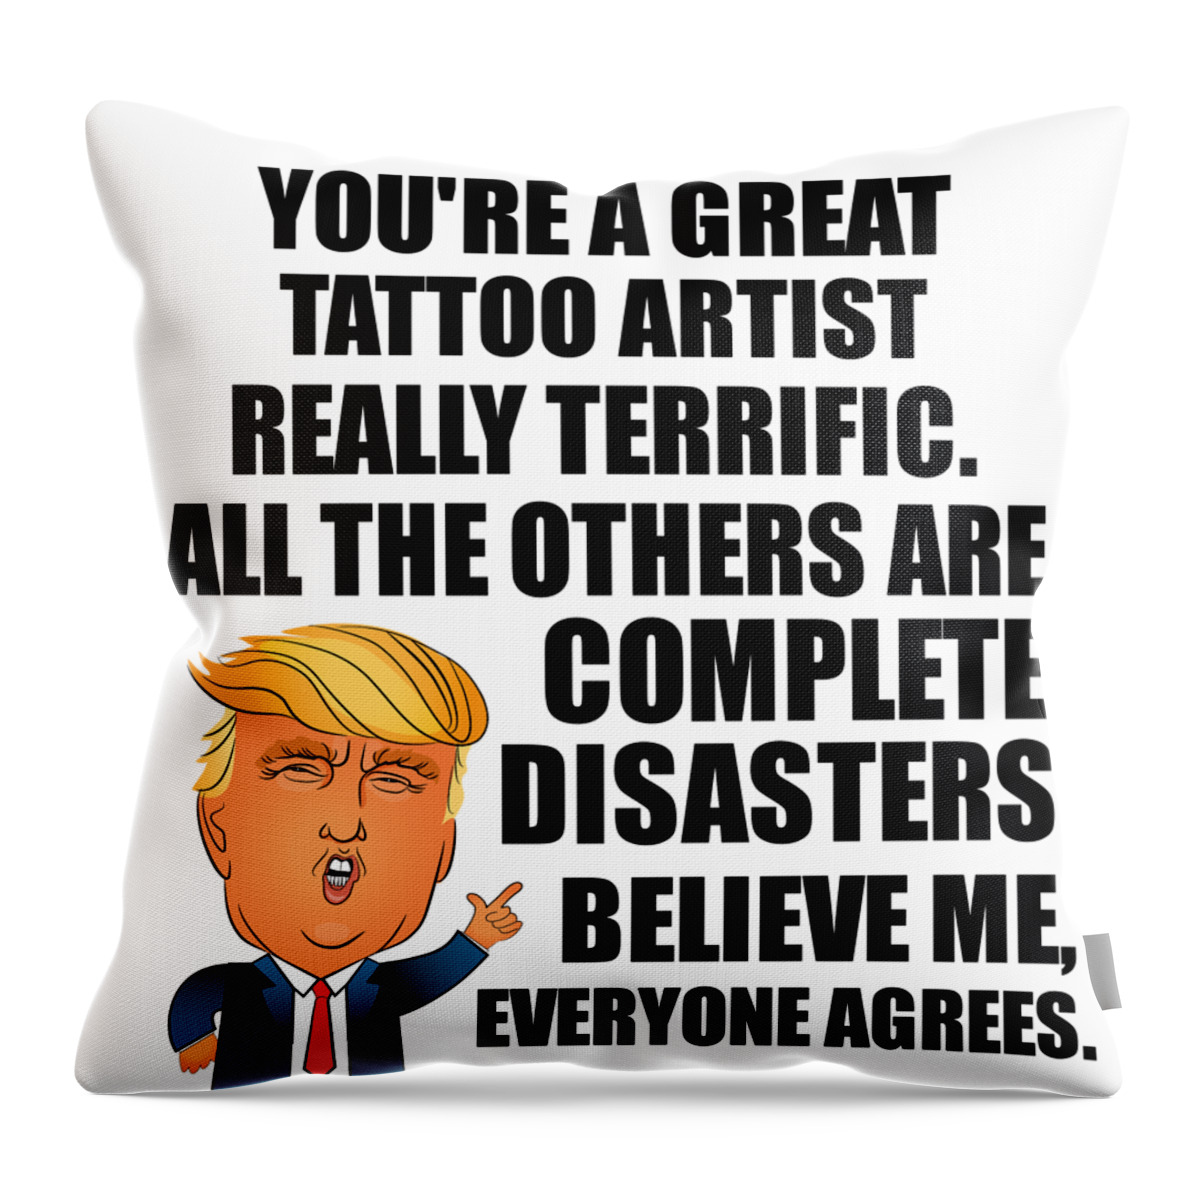 Tattoo Artist Throw Pillow featuring the digital art Trump Tattoo Artist Funny Gift for Tattoo Artist Coworker Gag Great Terrific President Fan Potus Quote Office Joke by Jeff Creation